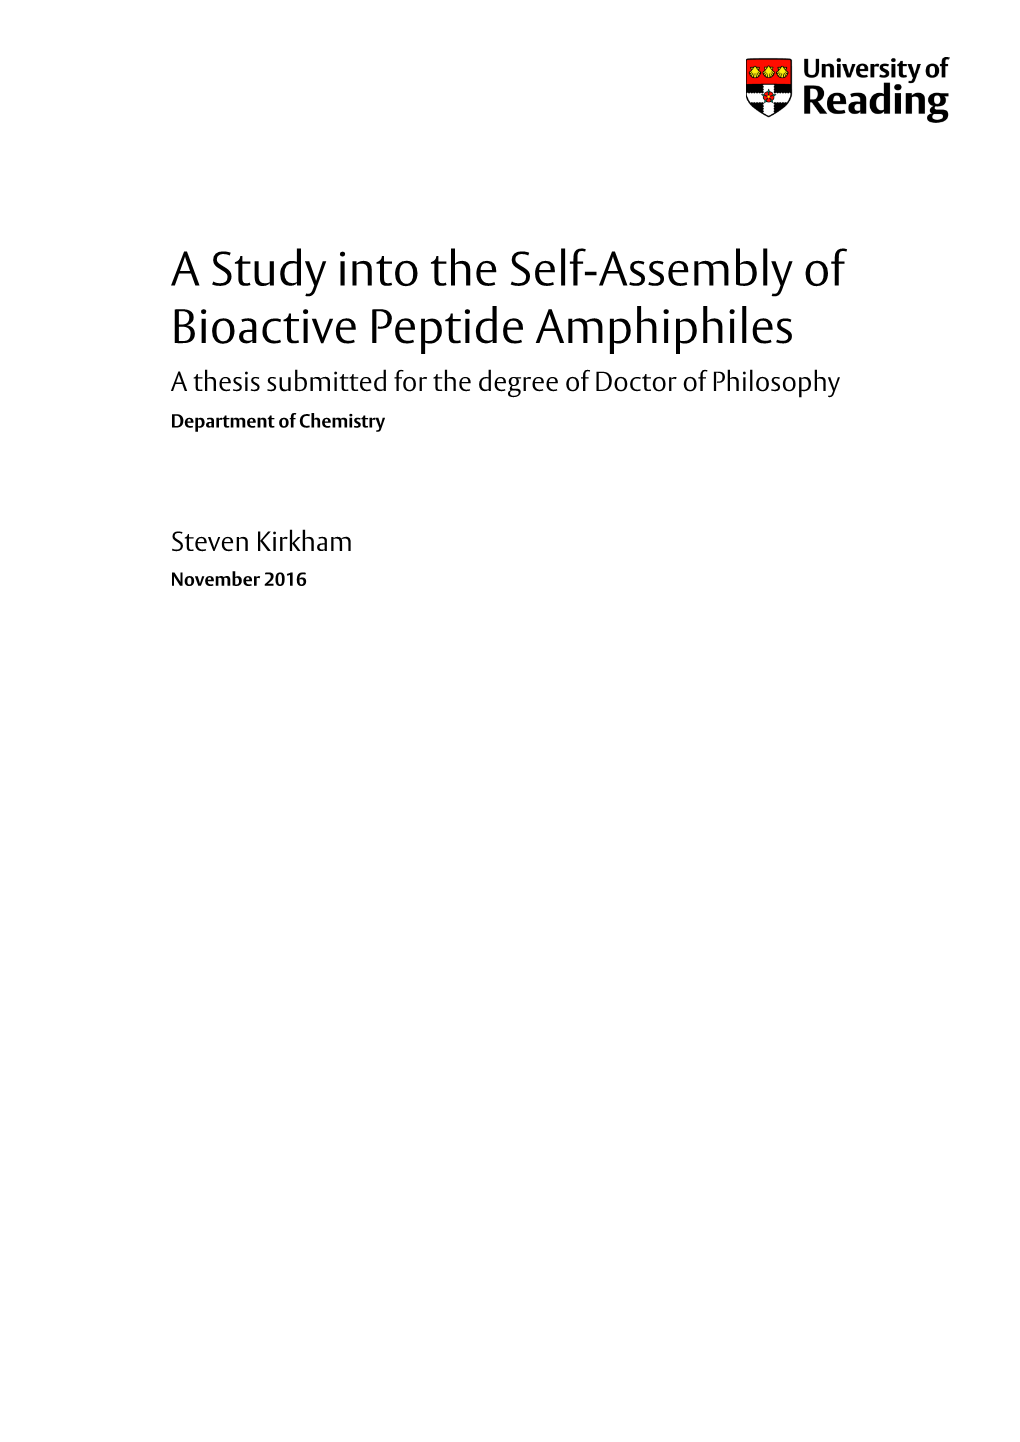 A Study Into the Self-Assembly of Bioactive Peptide Amphiphiles a Thesis Submitted for the Degree of Doctor of Philosophy Department of Chemistry